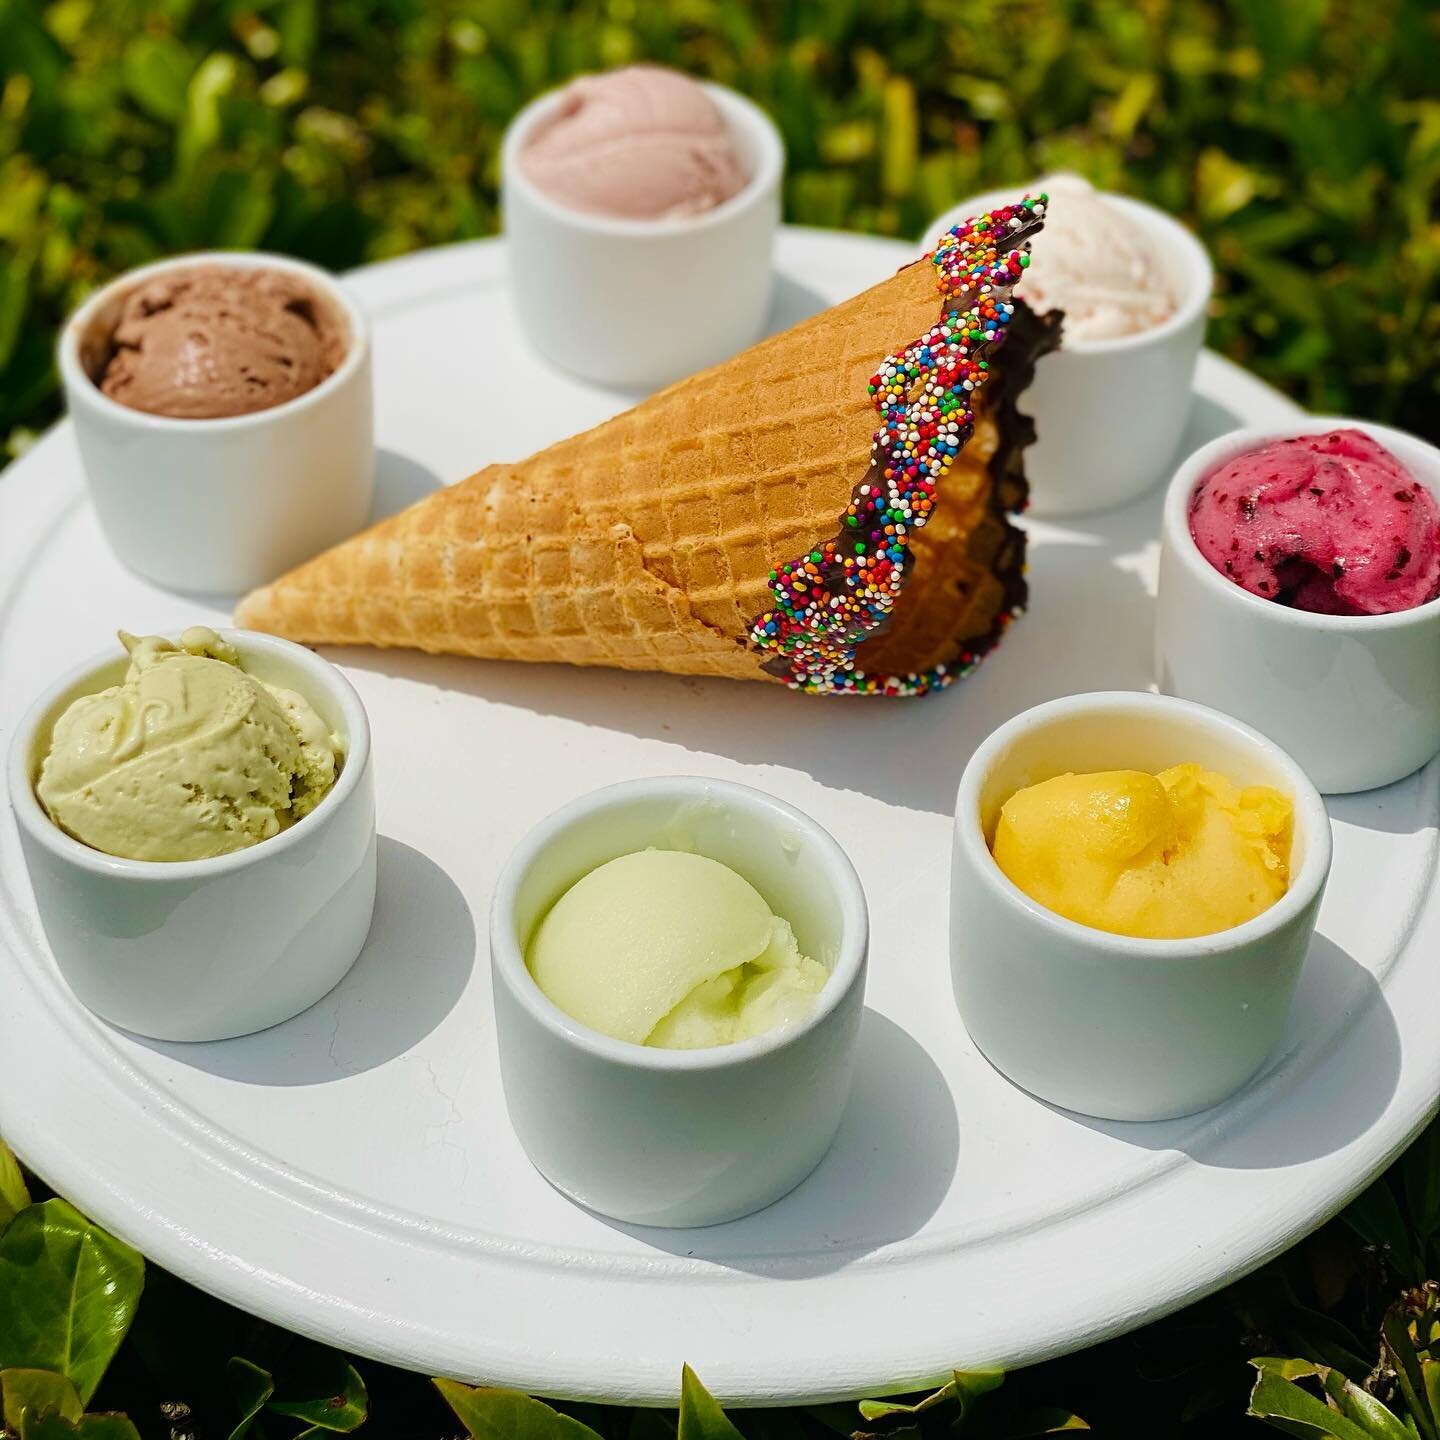 With so many fun events in the sunshine going on for @orcasislandpride, don&rsquo;t forget to cool off with an ice cream flight, with flavors as vibrant as our little island! We&rsquo;re open 12-8 all week; and can&rsquo;t wait to see and celebrate w